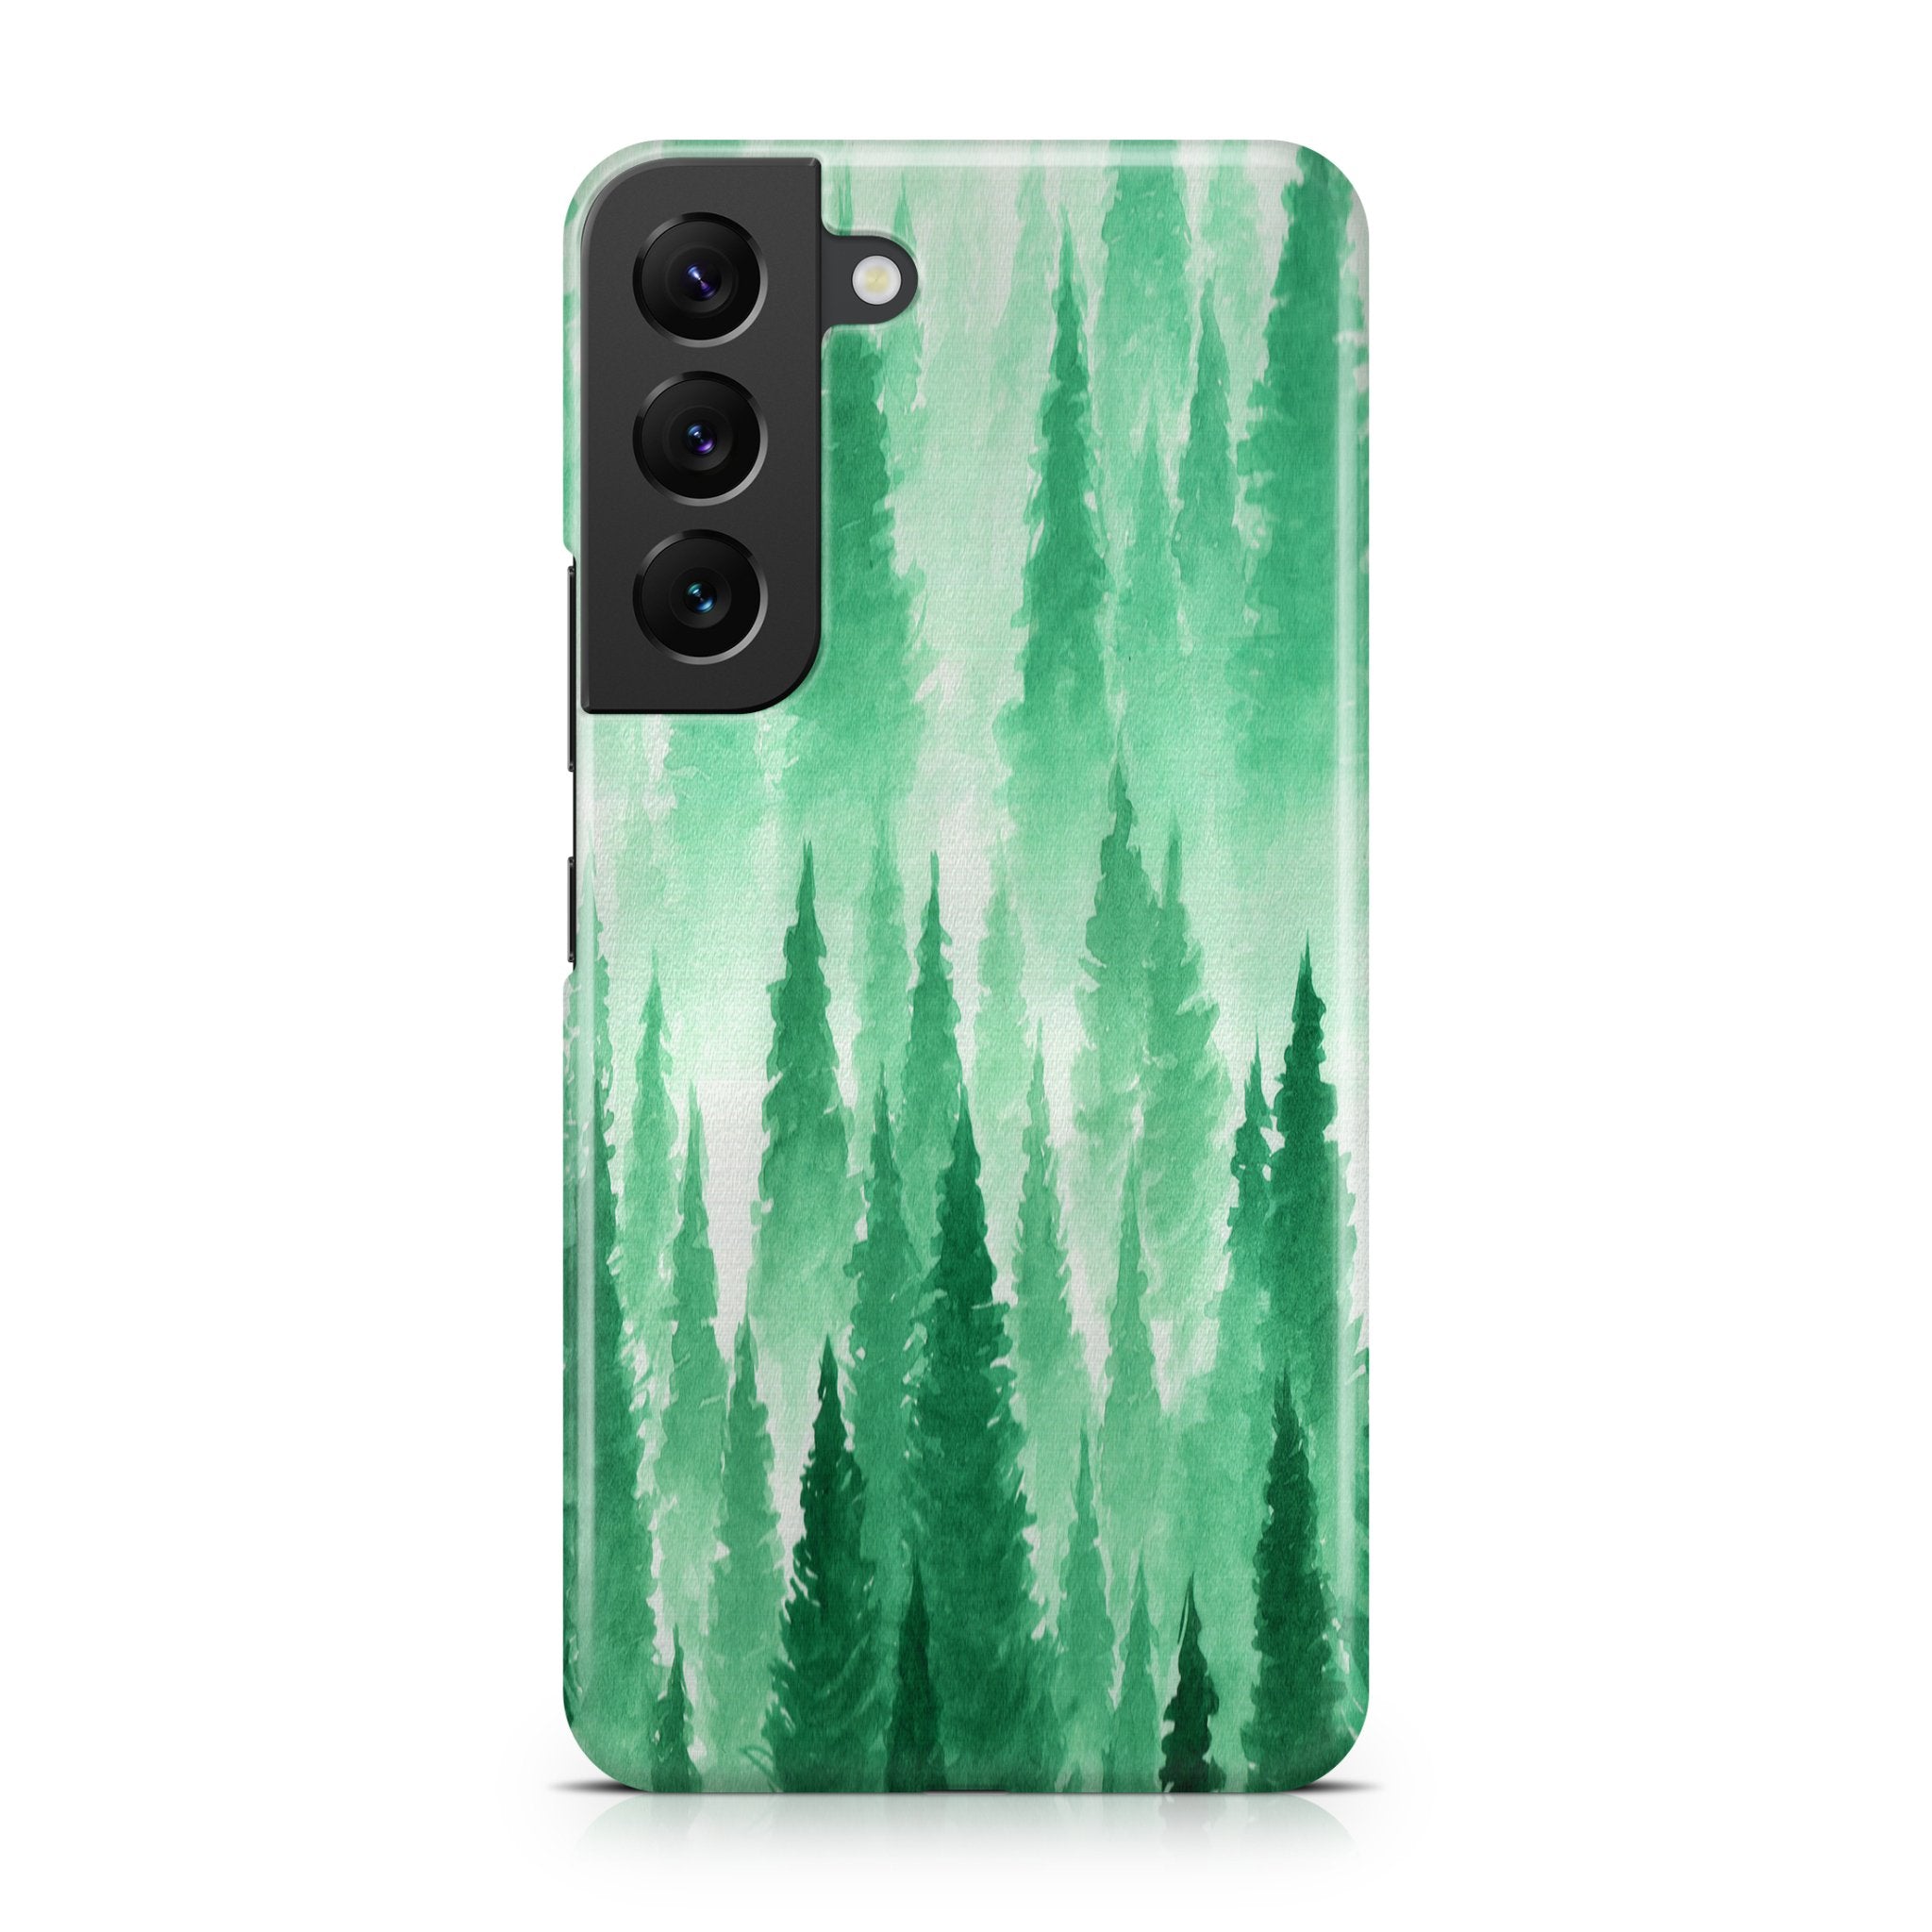 Green Mist Forest - Samsung phone case designs by CaseSwagger